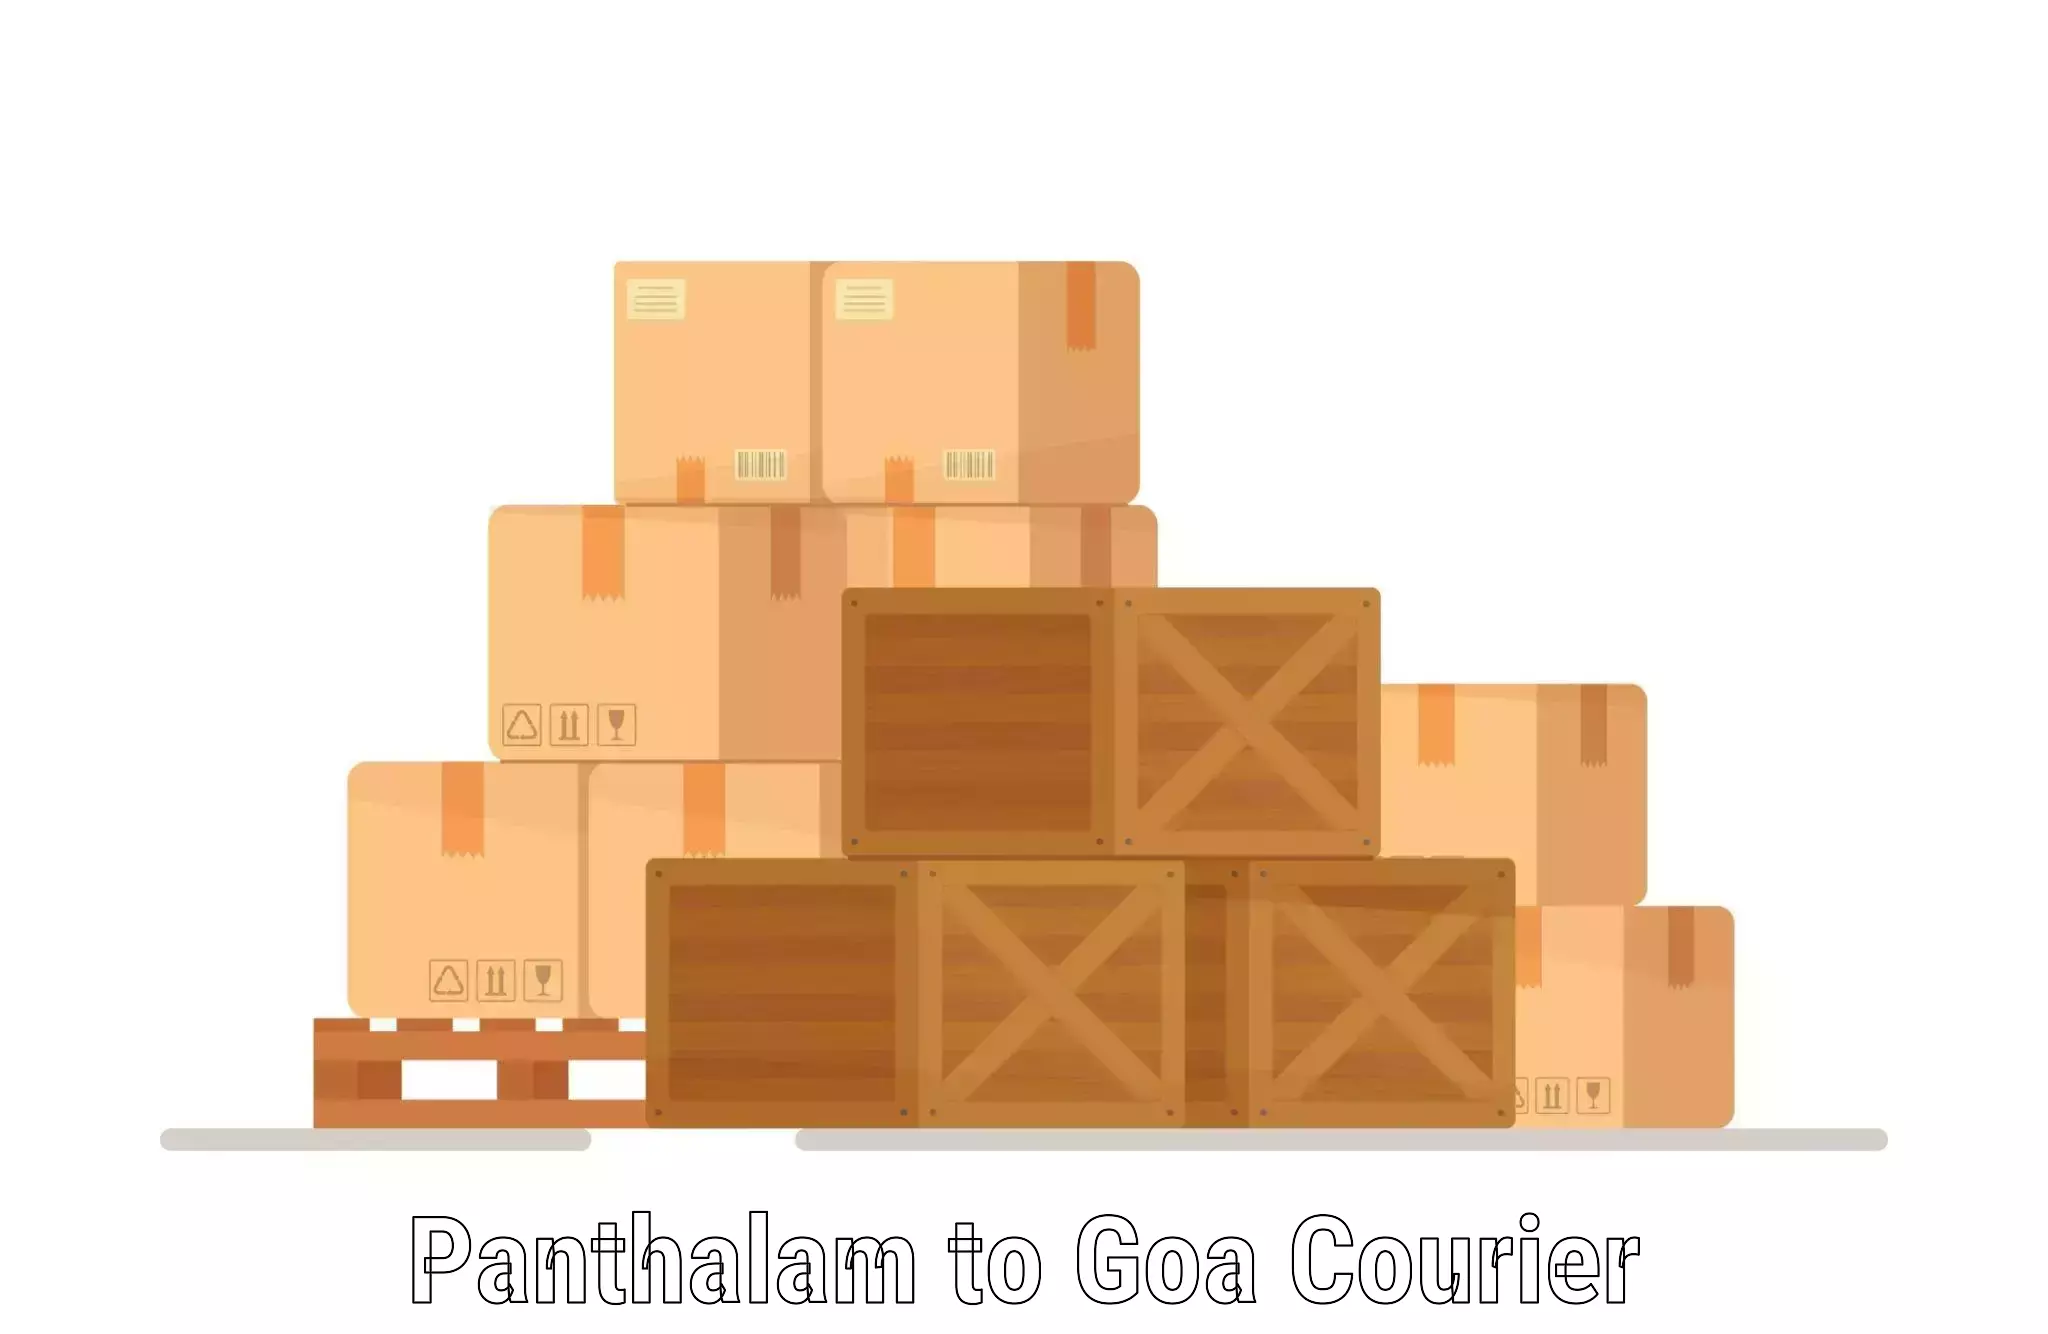 Return courier service Panthalam to Goa